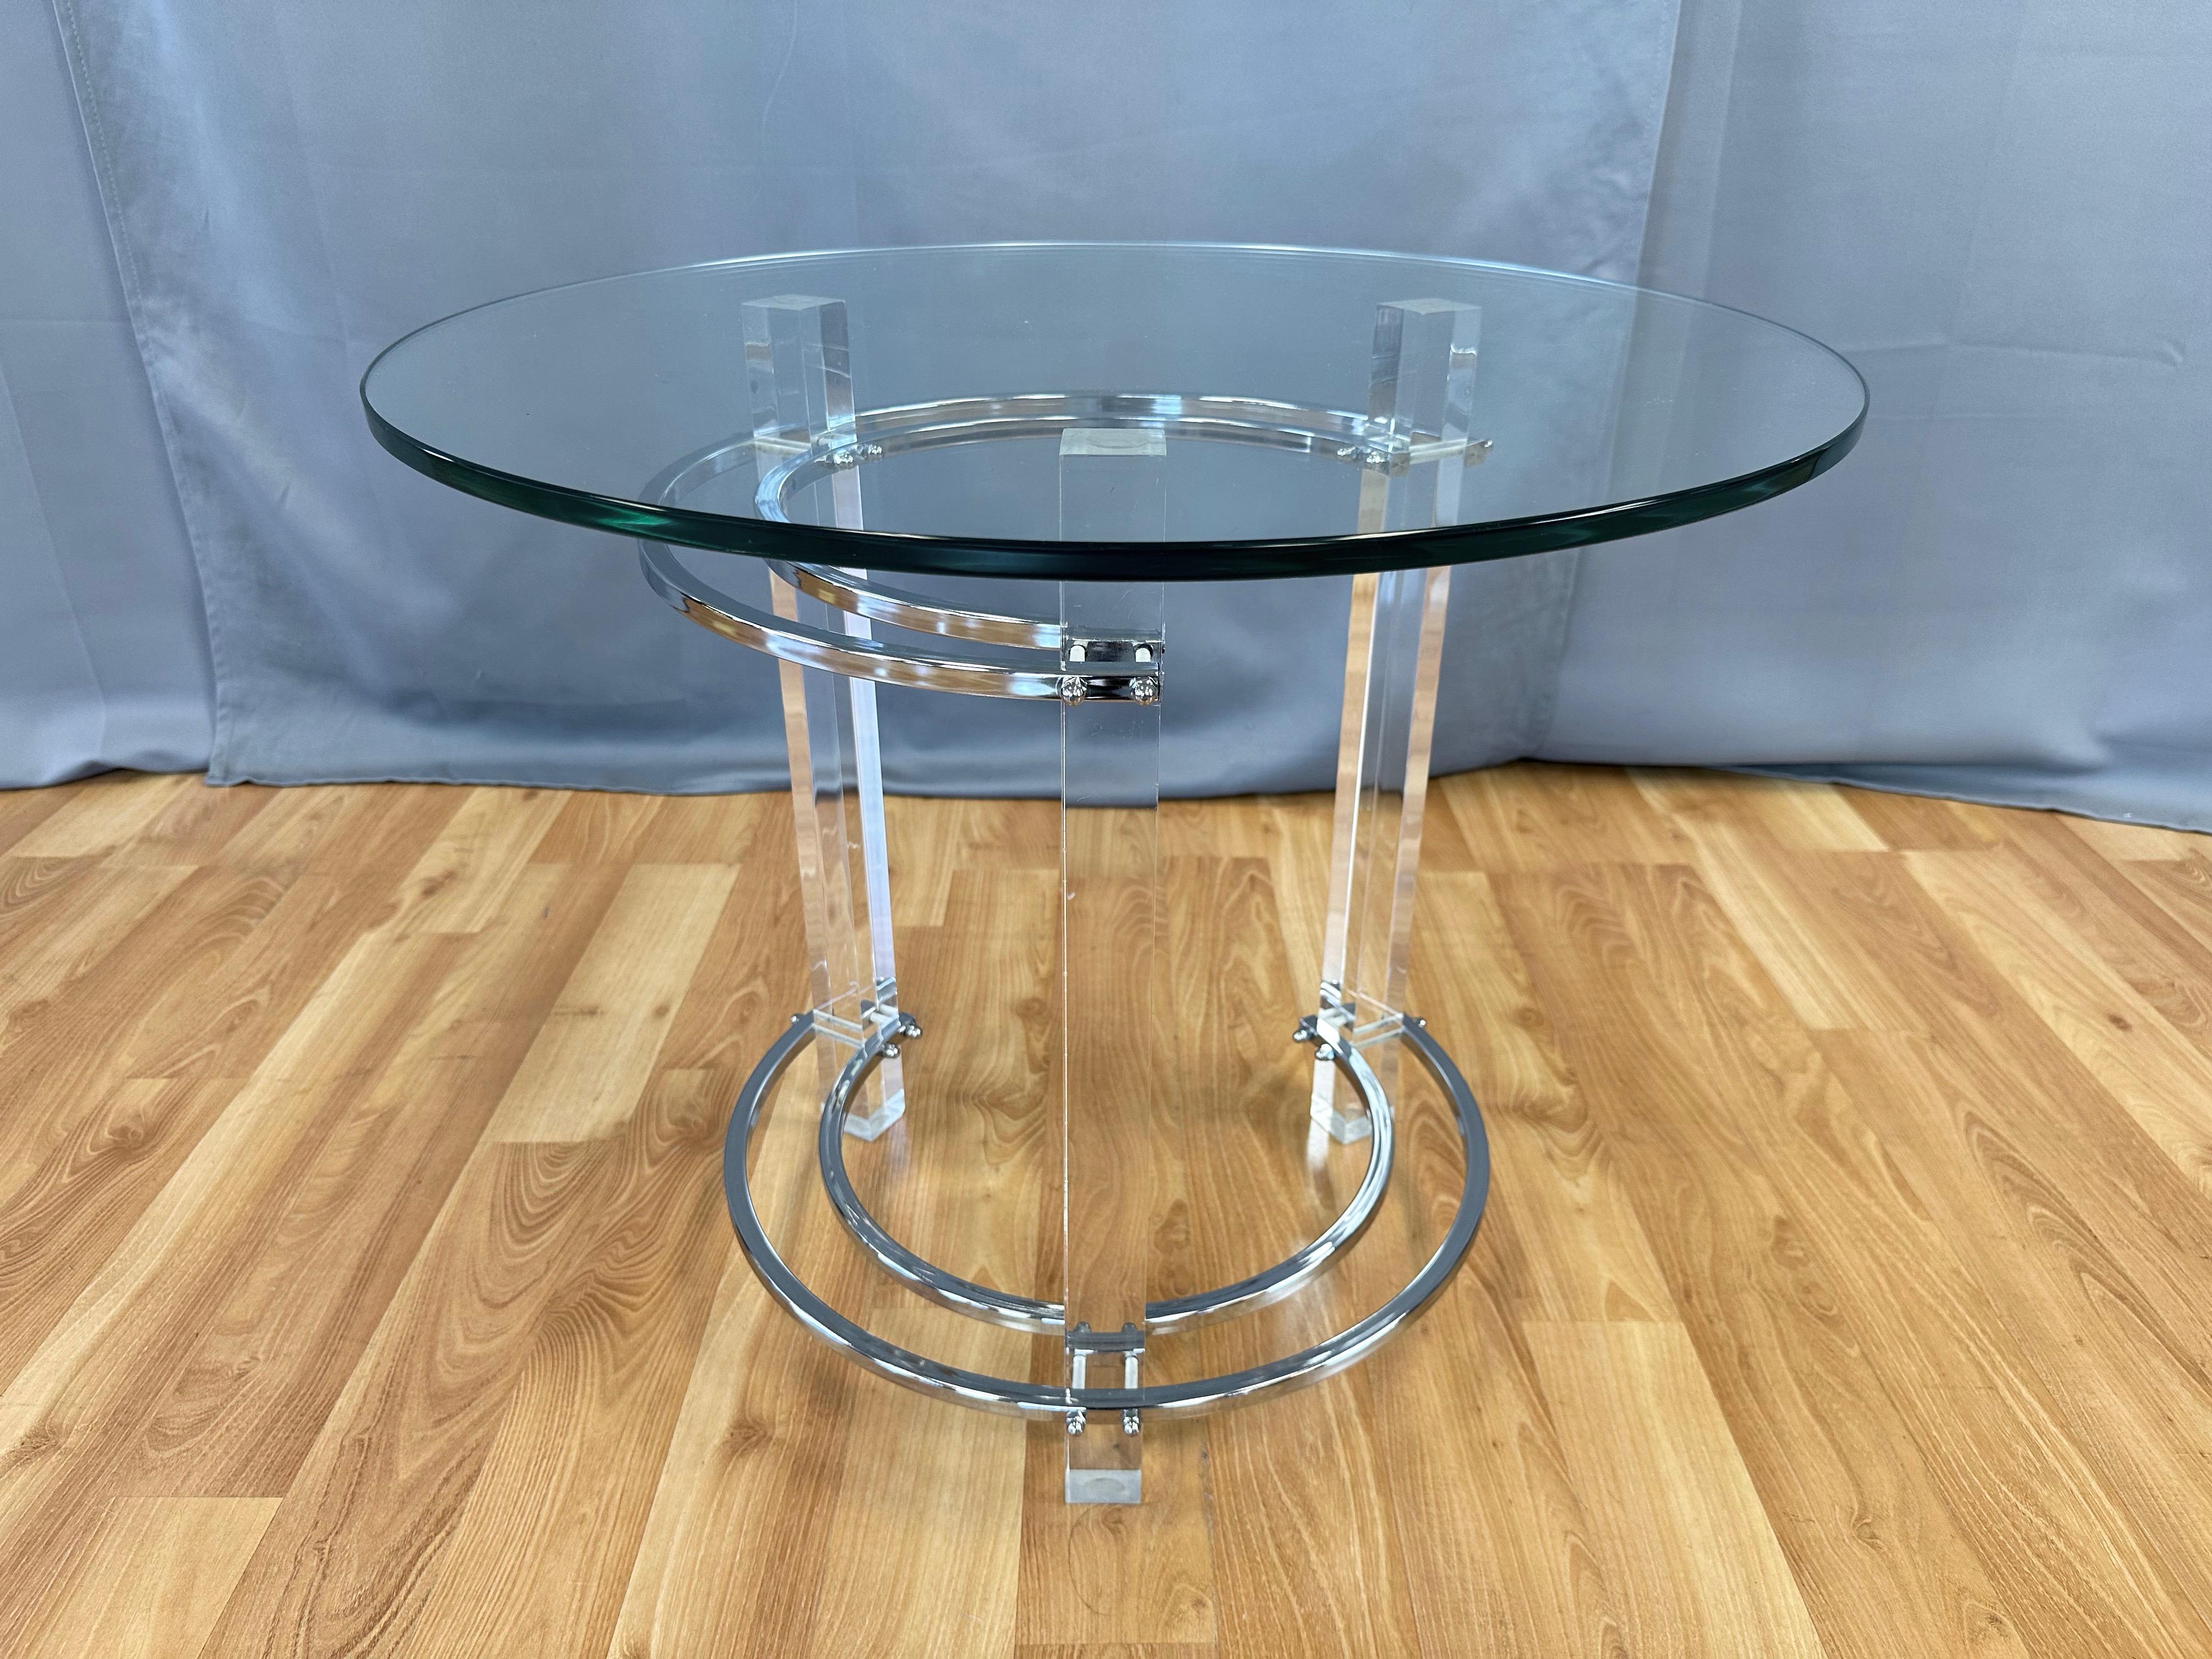 A fabulous 1970s Hollywood Regency-meets-Minimalist lucite and chrome side table or end table with glass top by Charles Hollis Jones. 

A trio of crystal clear 1.63 in. sq. lucite columns is connected via two pair of chrome-finish concentric